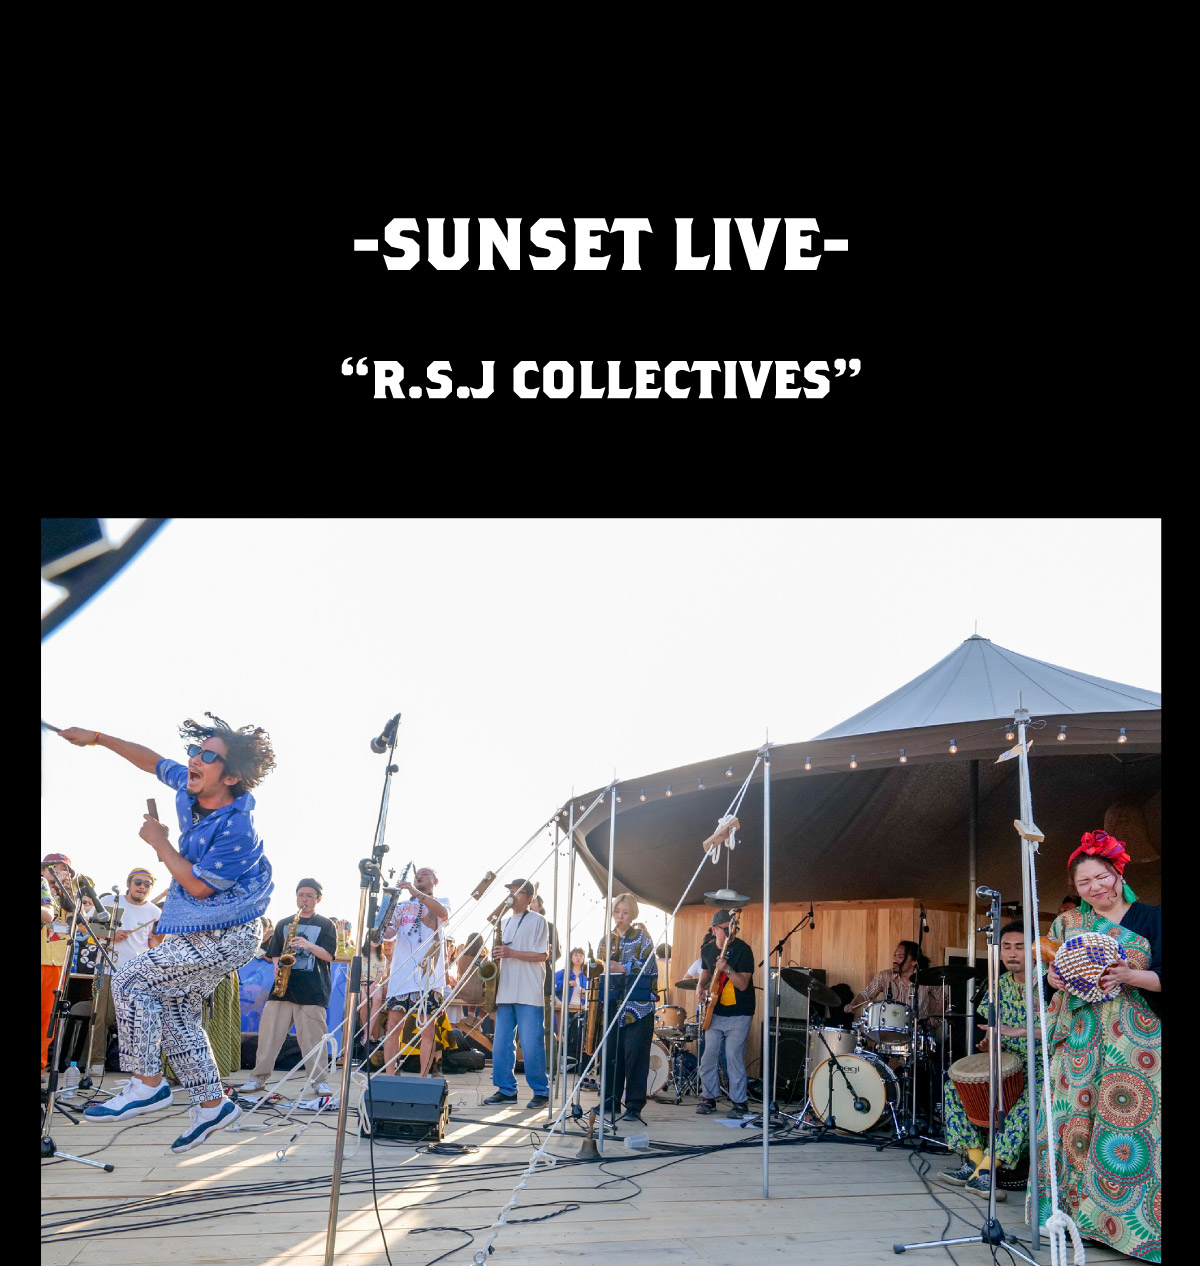 SUNSET LIVE -R.S.J COLLECTIVES